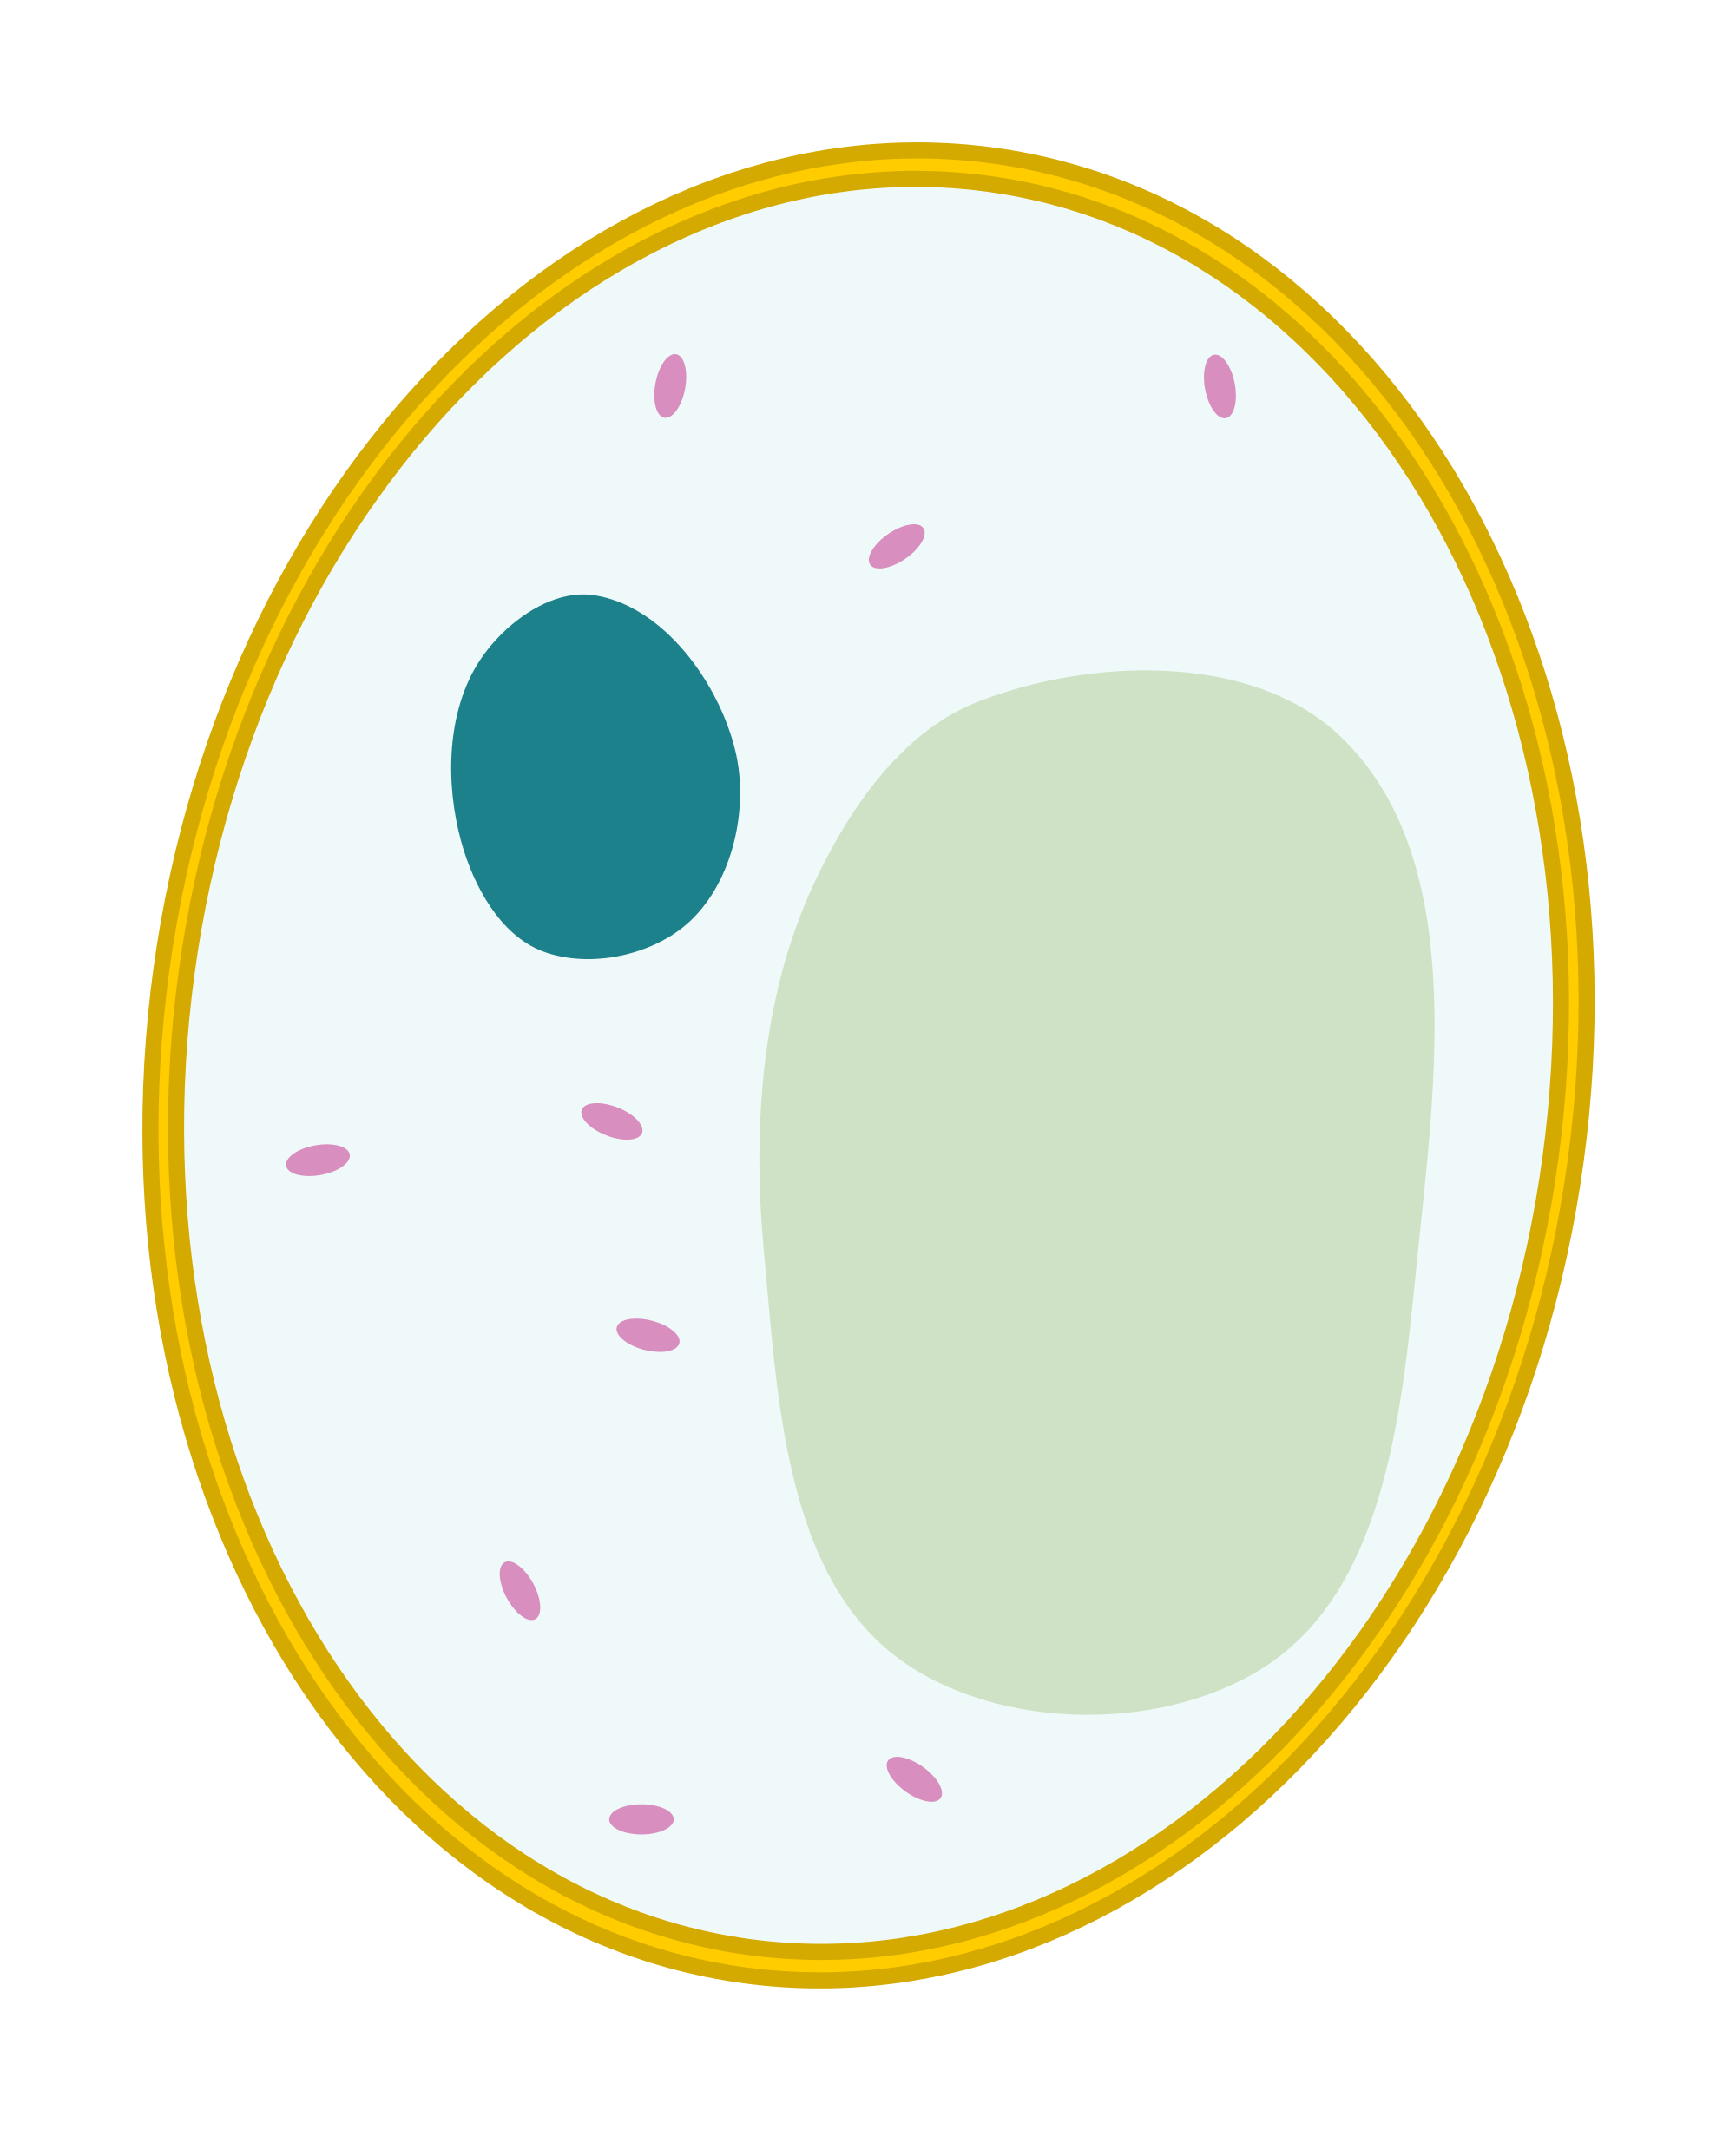 Animal Cell Diagram Without Labels - ClipArt Best